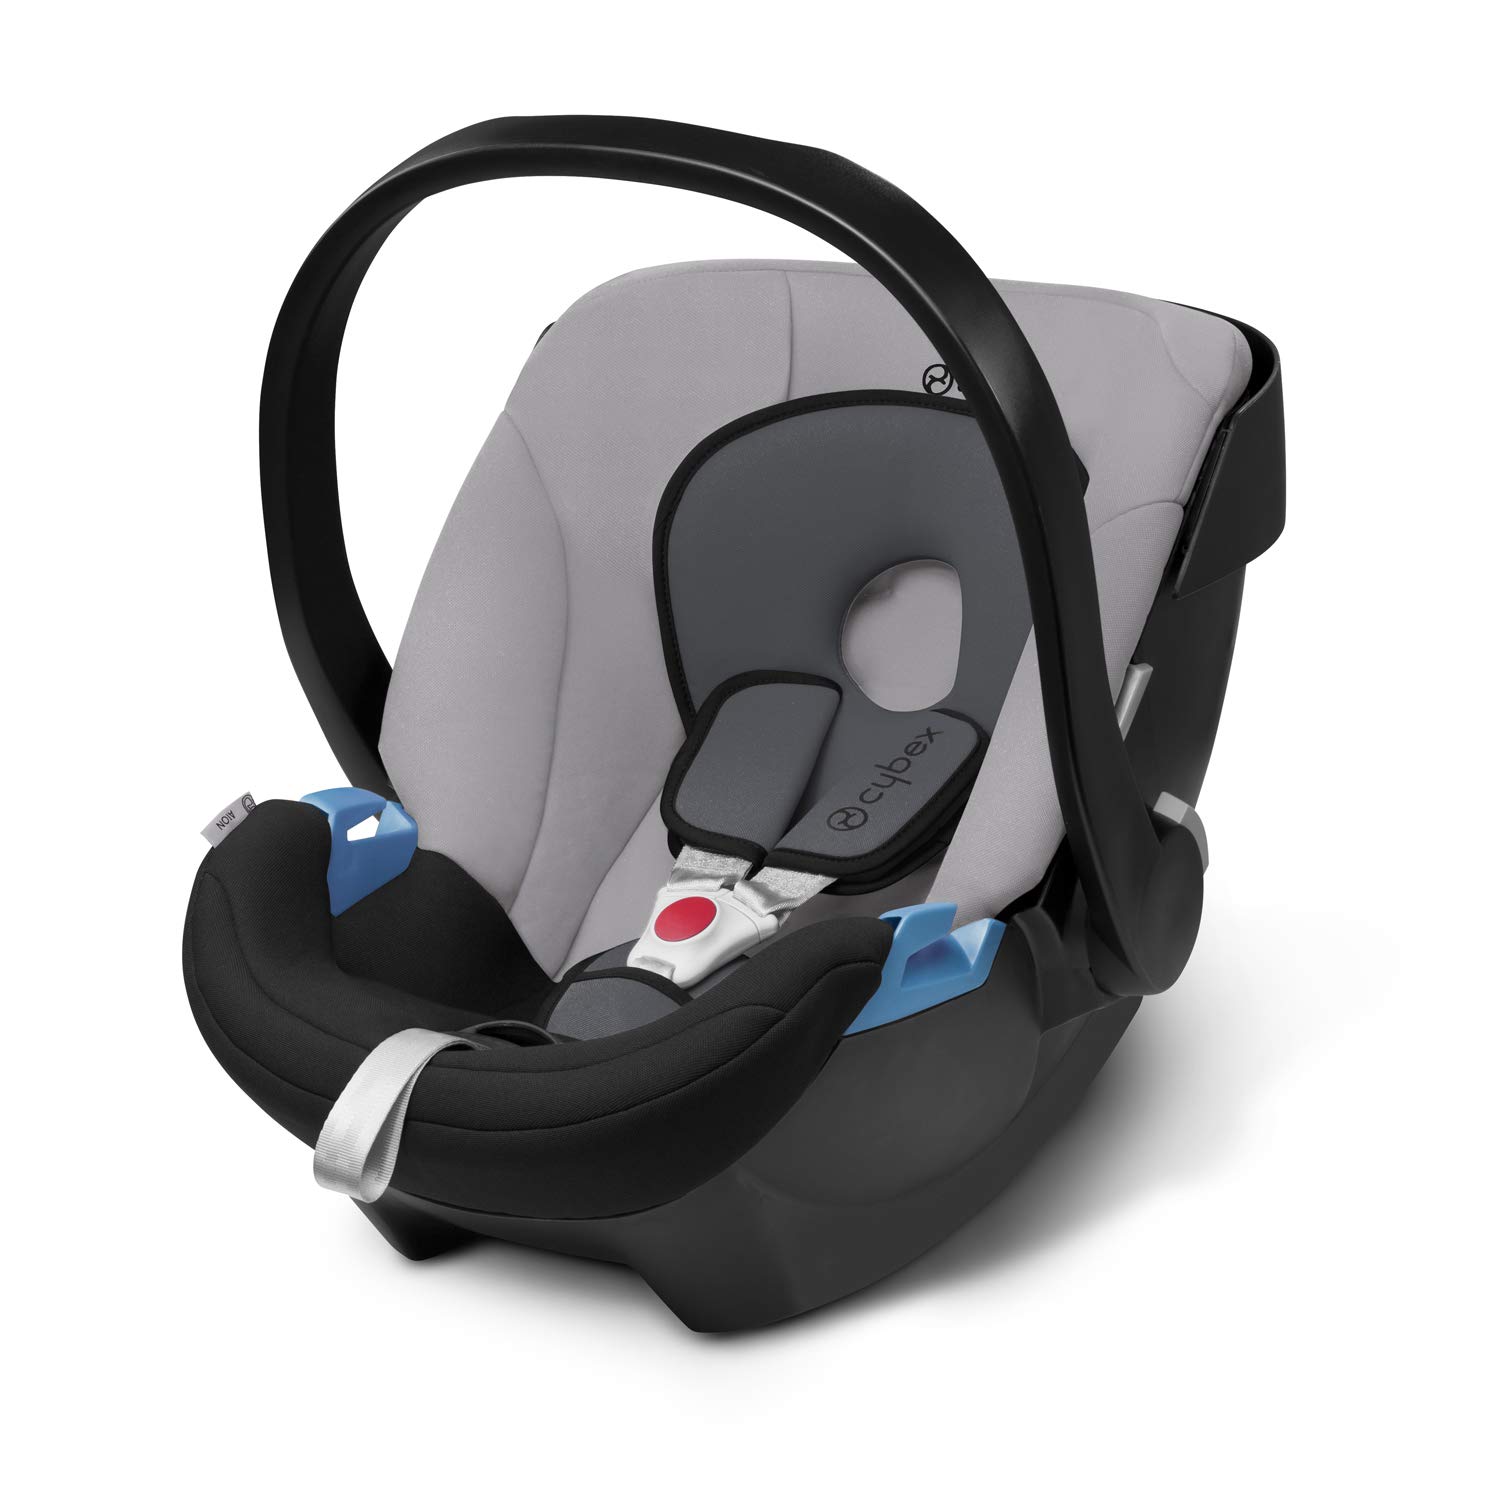 Cybex Silver Aton Baby Car Seat With Newborn Insert From Birth To Approx. 1